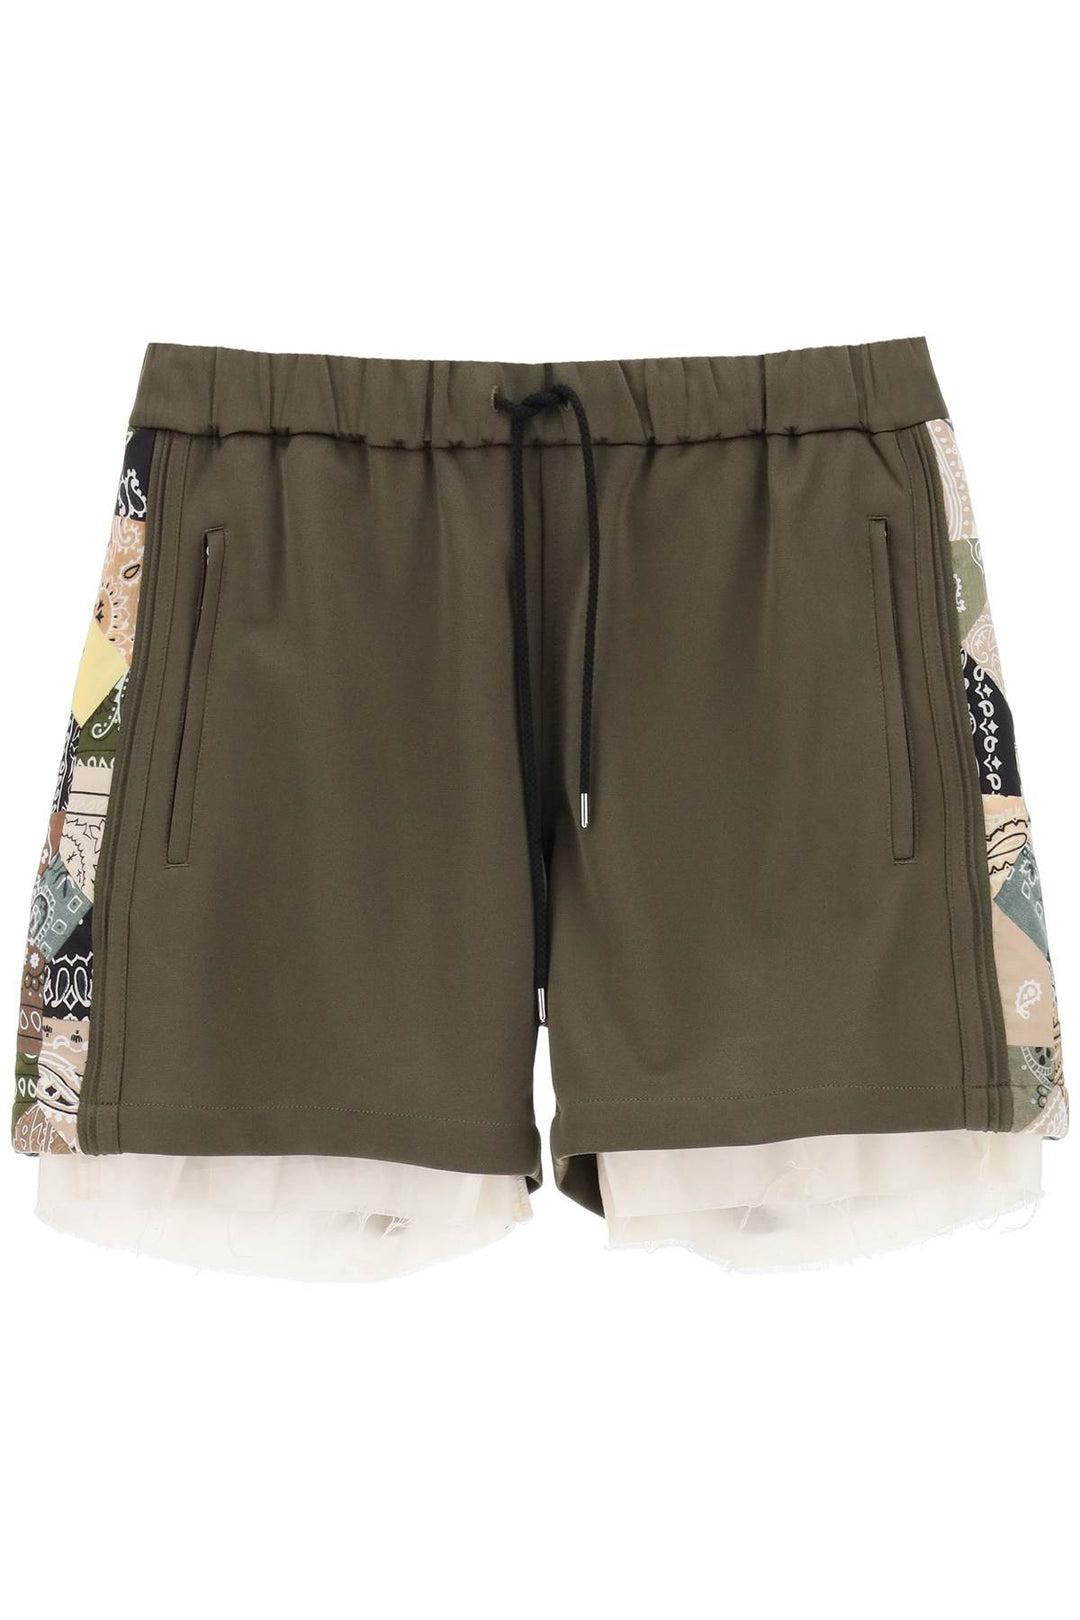 Children of the discordance jersey shorts with bandana bands-0